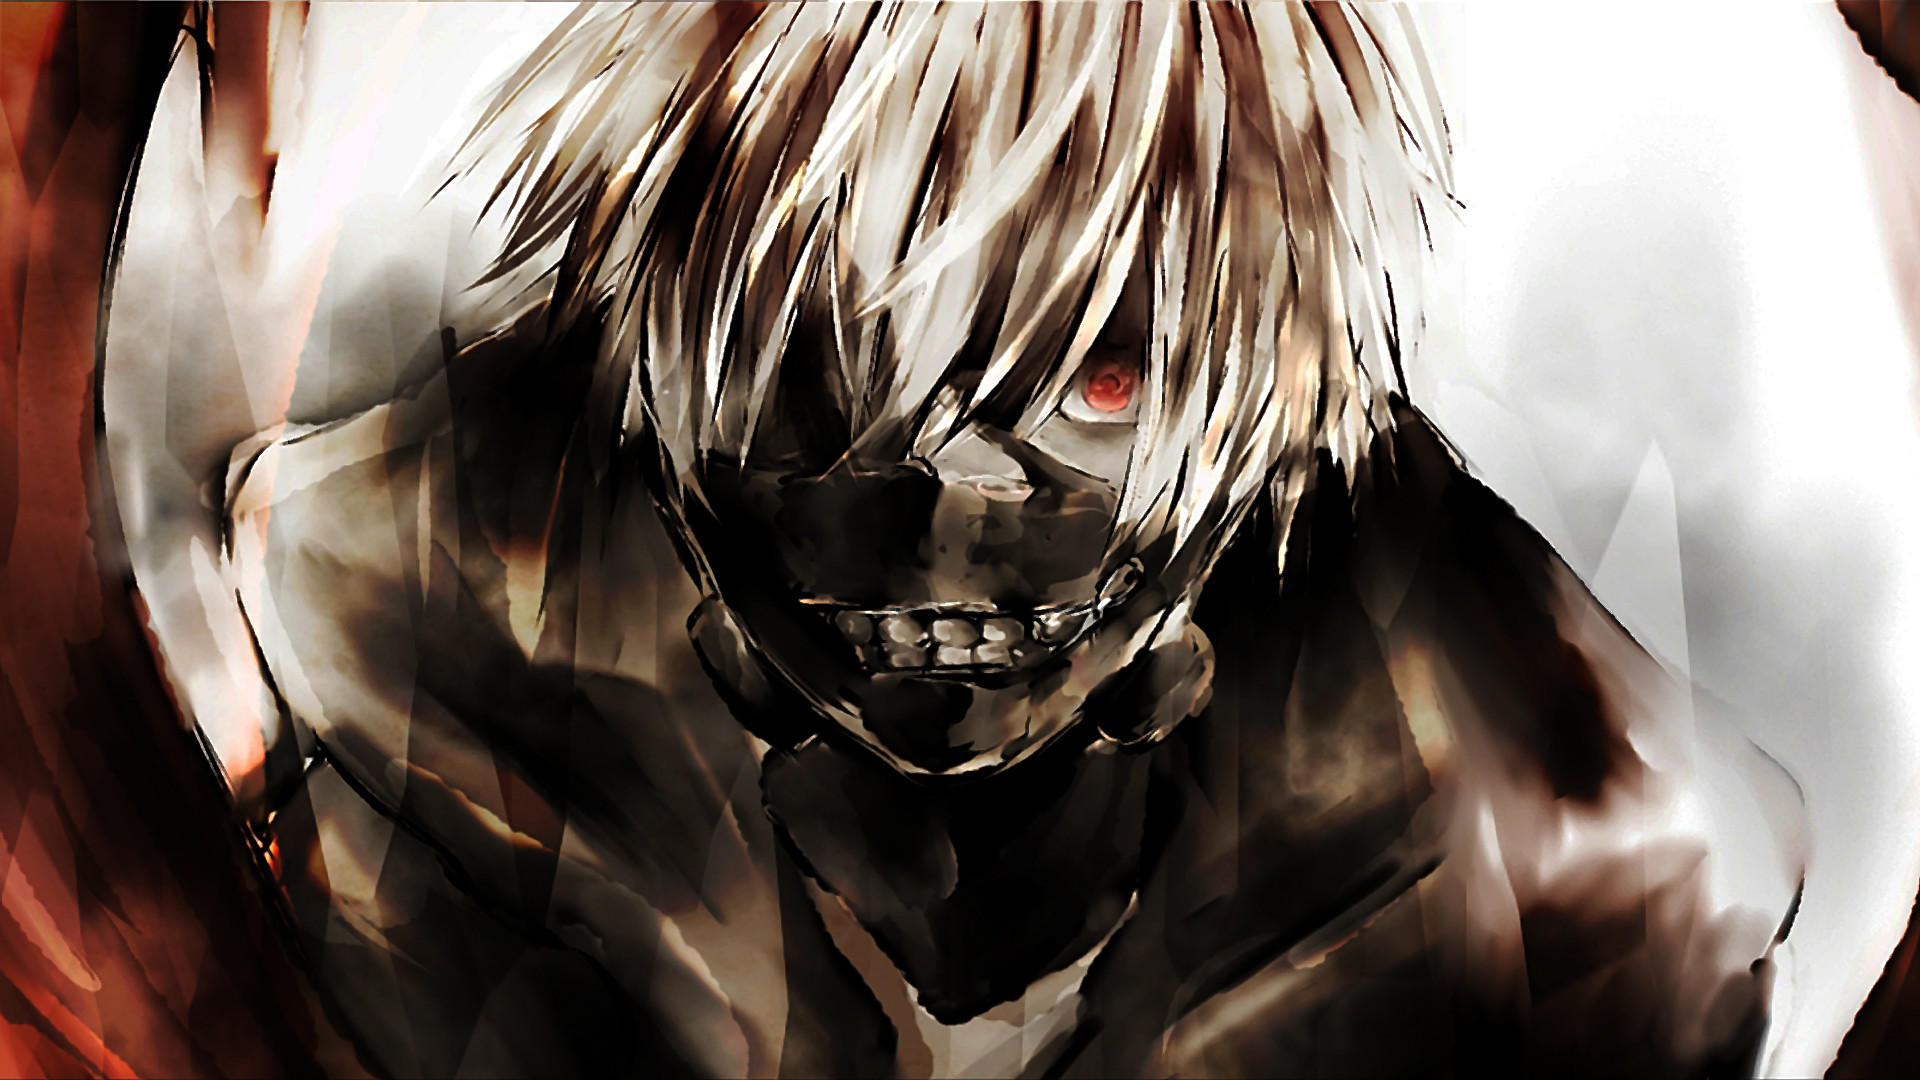 1920x1080 Tokyo Ghoul Hd Wallpaper Pictures to share, Tokyo Ghoul Hd Wallpaper Pix